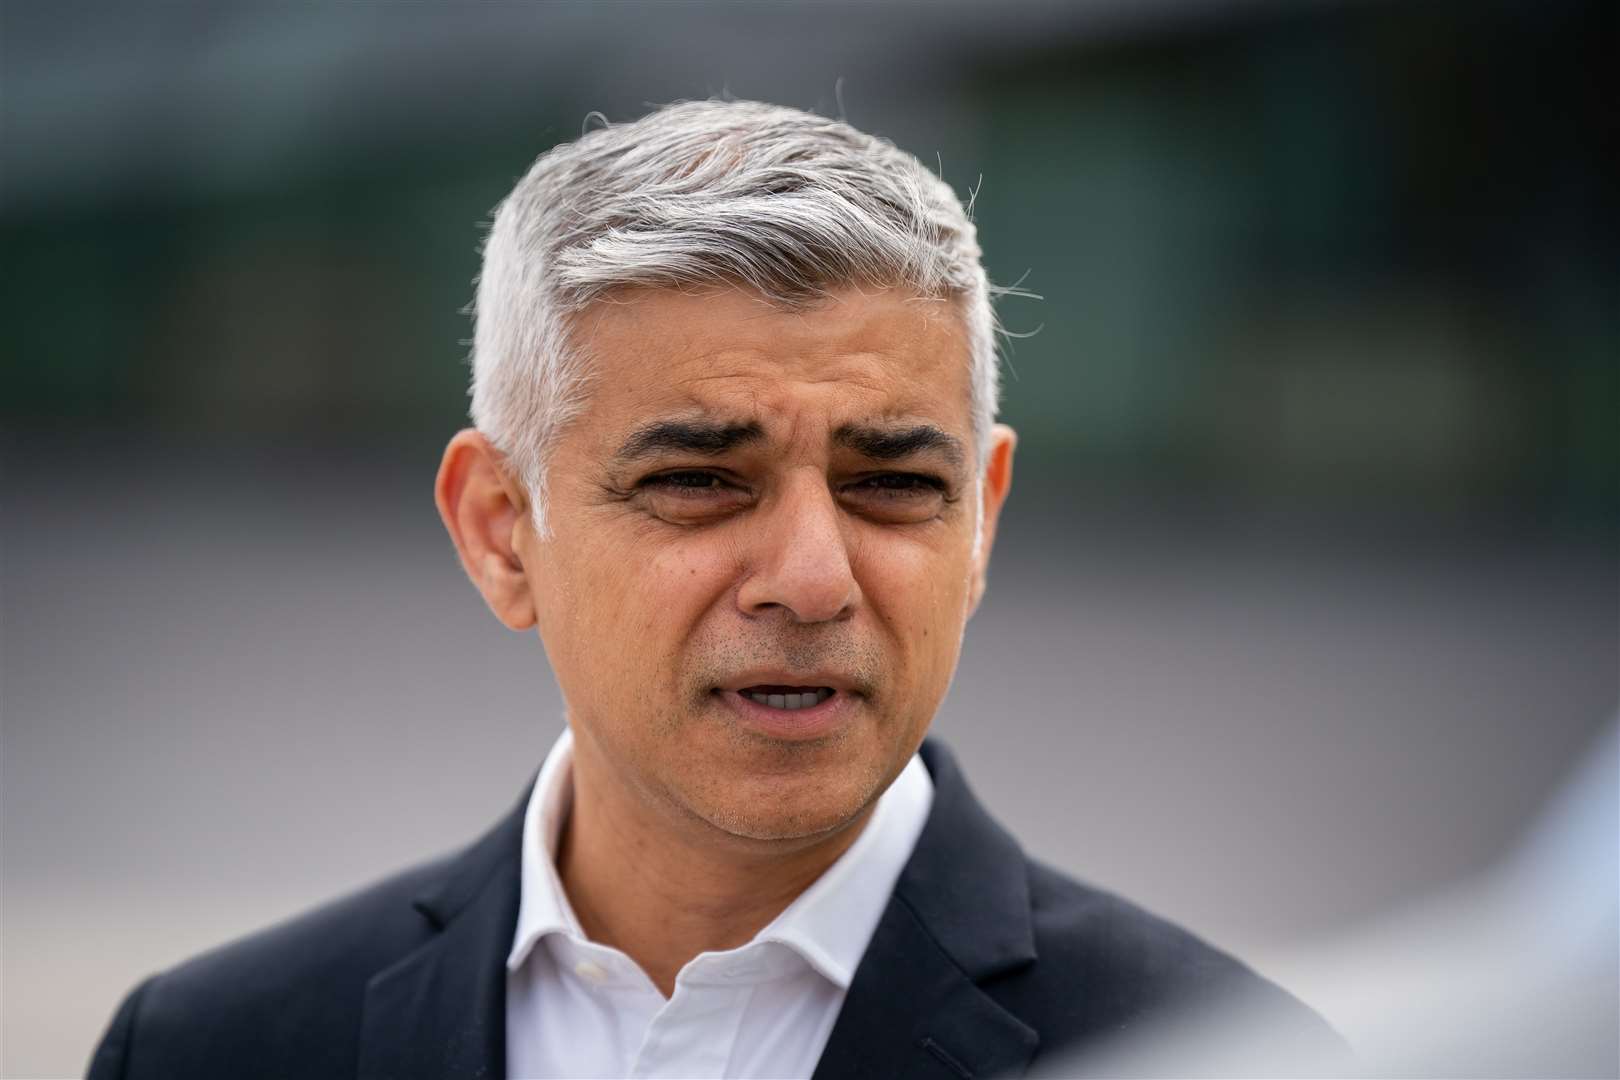 Sadiq Khan said the ‘epidemic of violence is a crisis which should shame us all’ (Aaron Chown/PA)